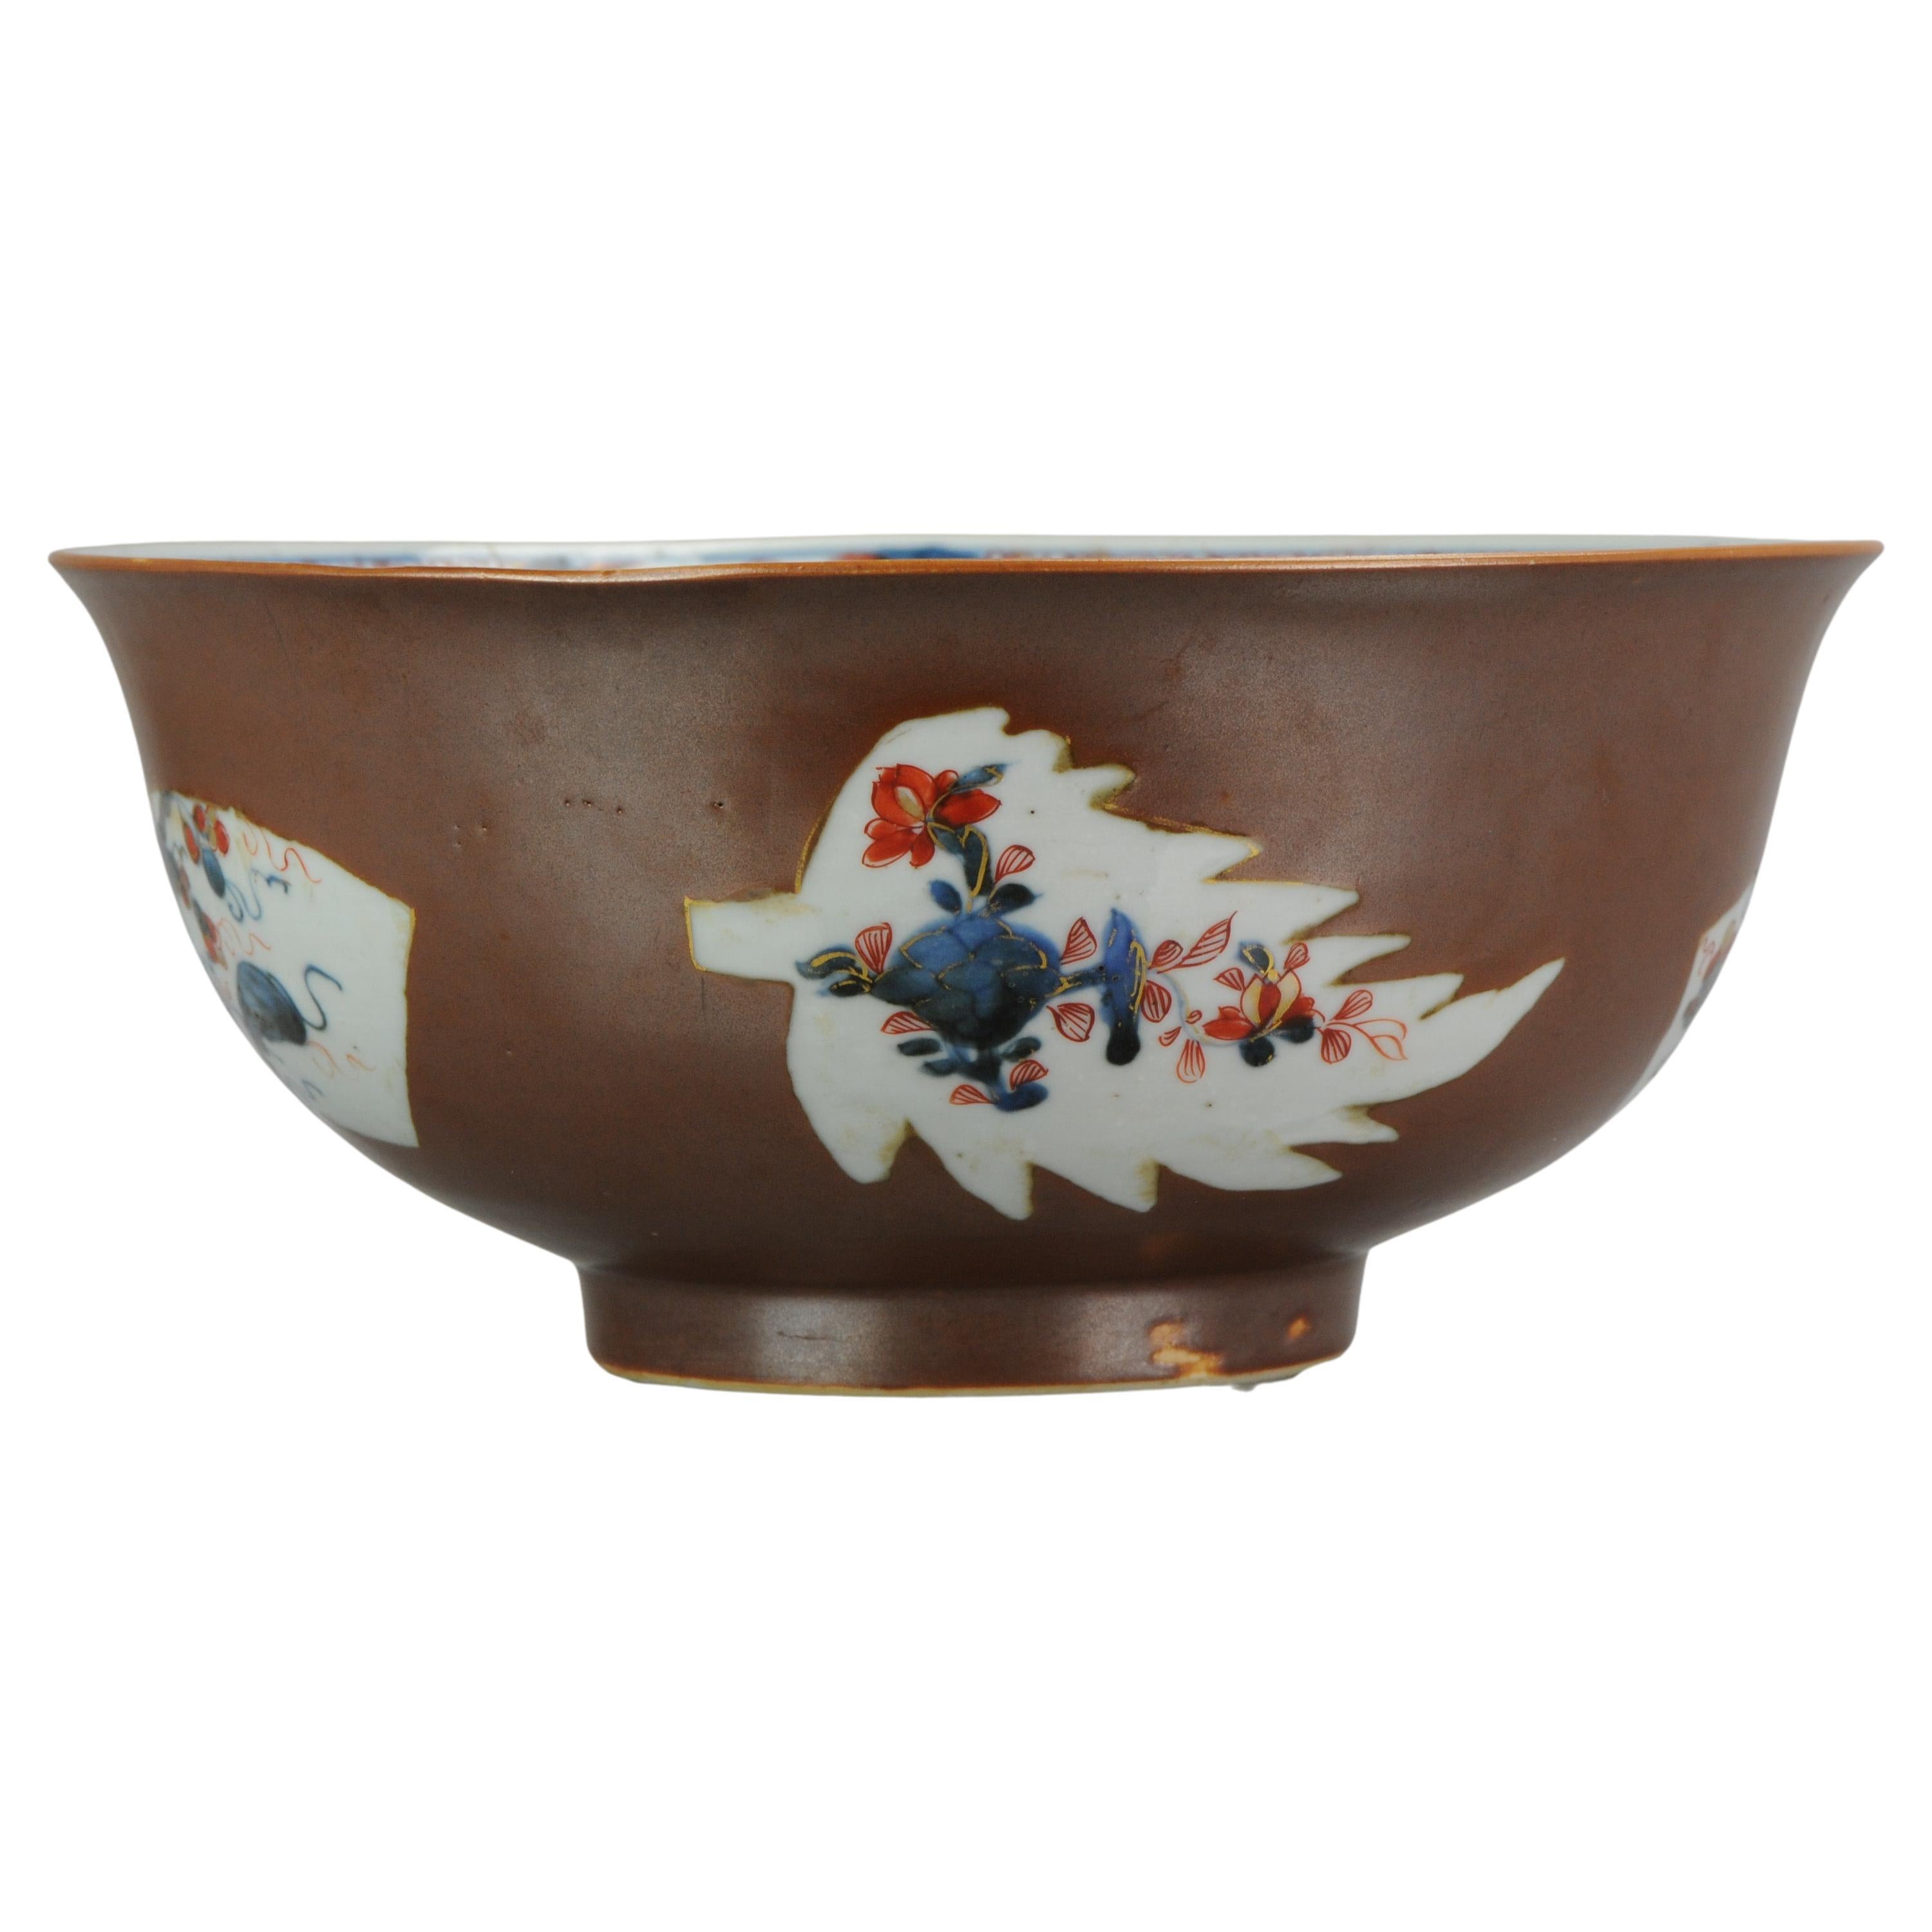 Chinese Porcelain 19th C Bowl - 13 For Sale on 1stDibs